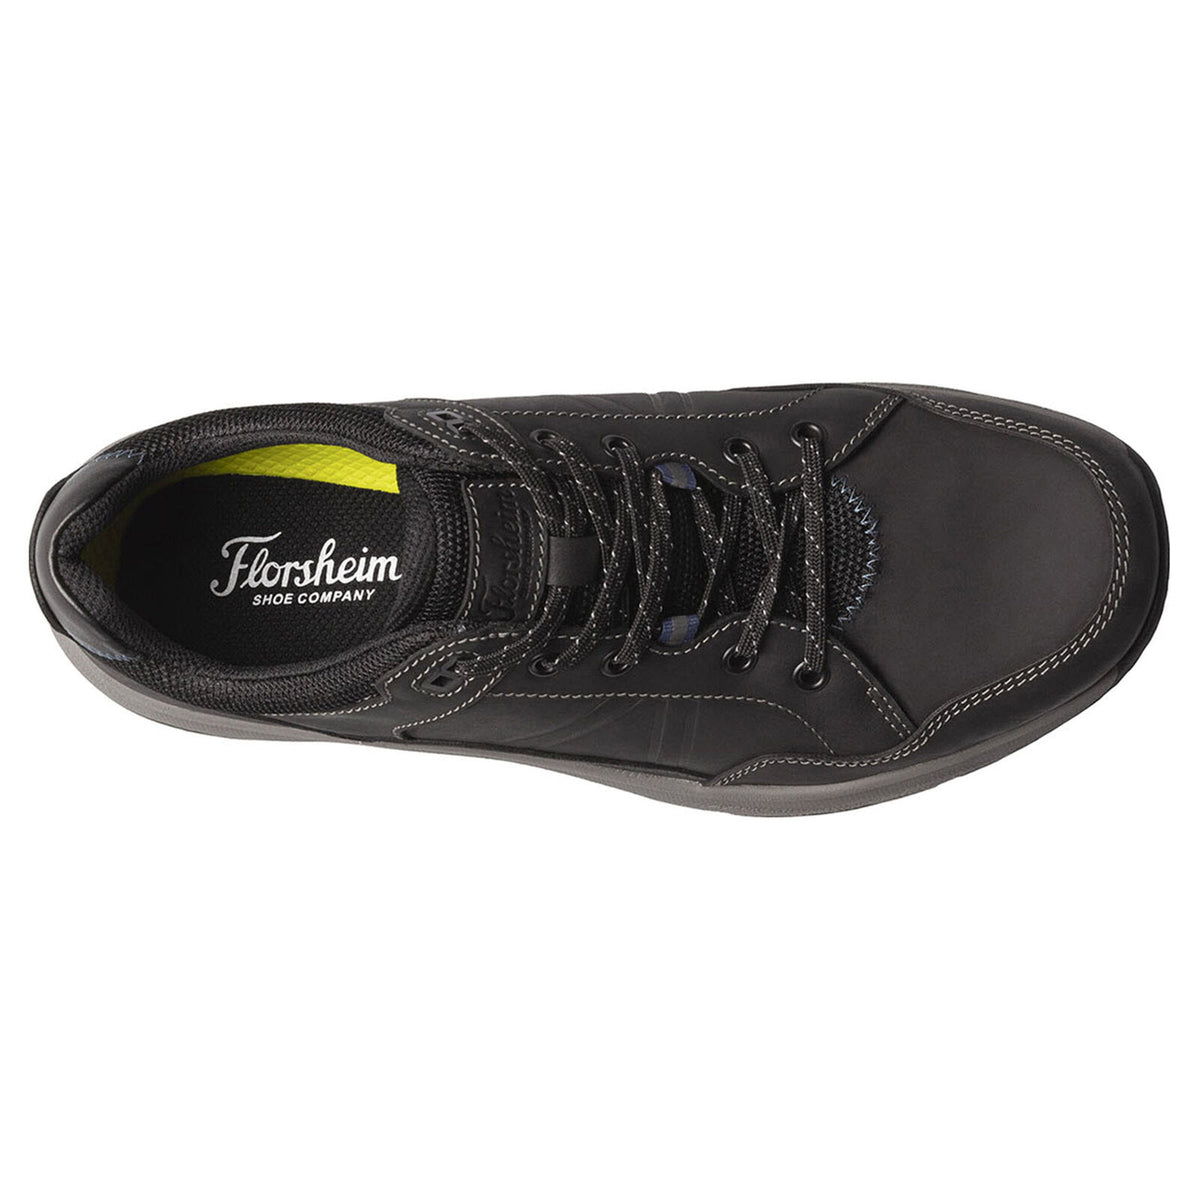 A single FLORSHEIM TREAD LITE MOC LACE BLACK - MENS shoe, featuring a Comfortech footbed and viewed from above.